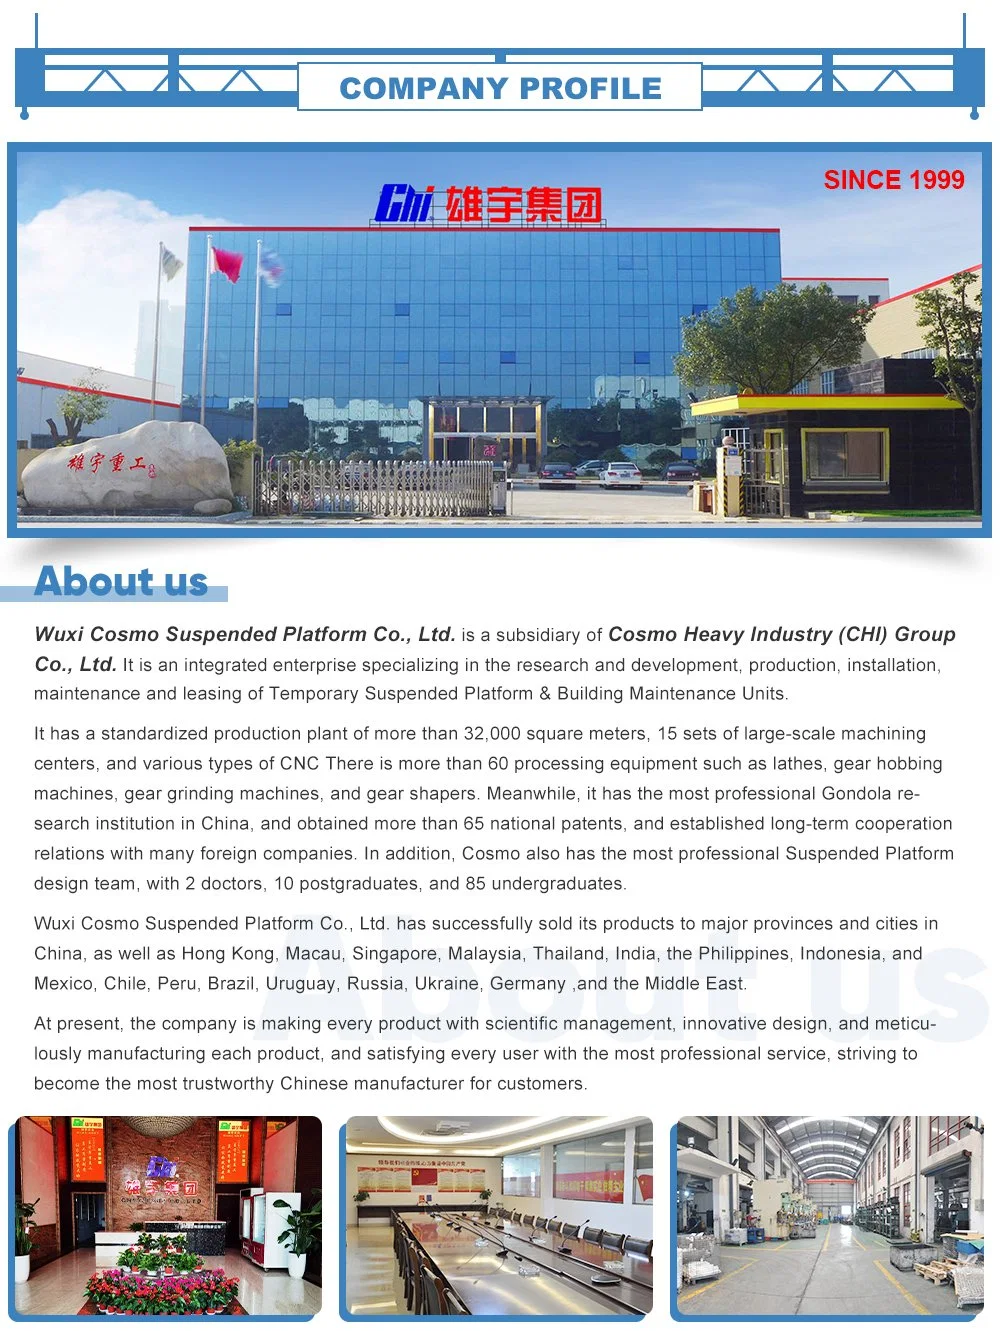 Zlp630, 630kg, 6m Aluminum Alloy Suspended Lifting Platform, Cradle, Gondola for Building Facade Window Cleaning and Curtain Wall Installation with CE Approved